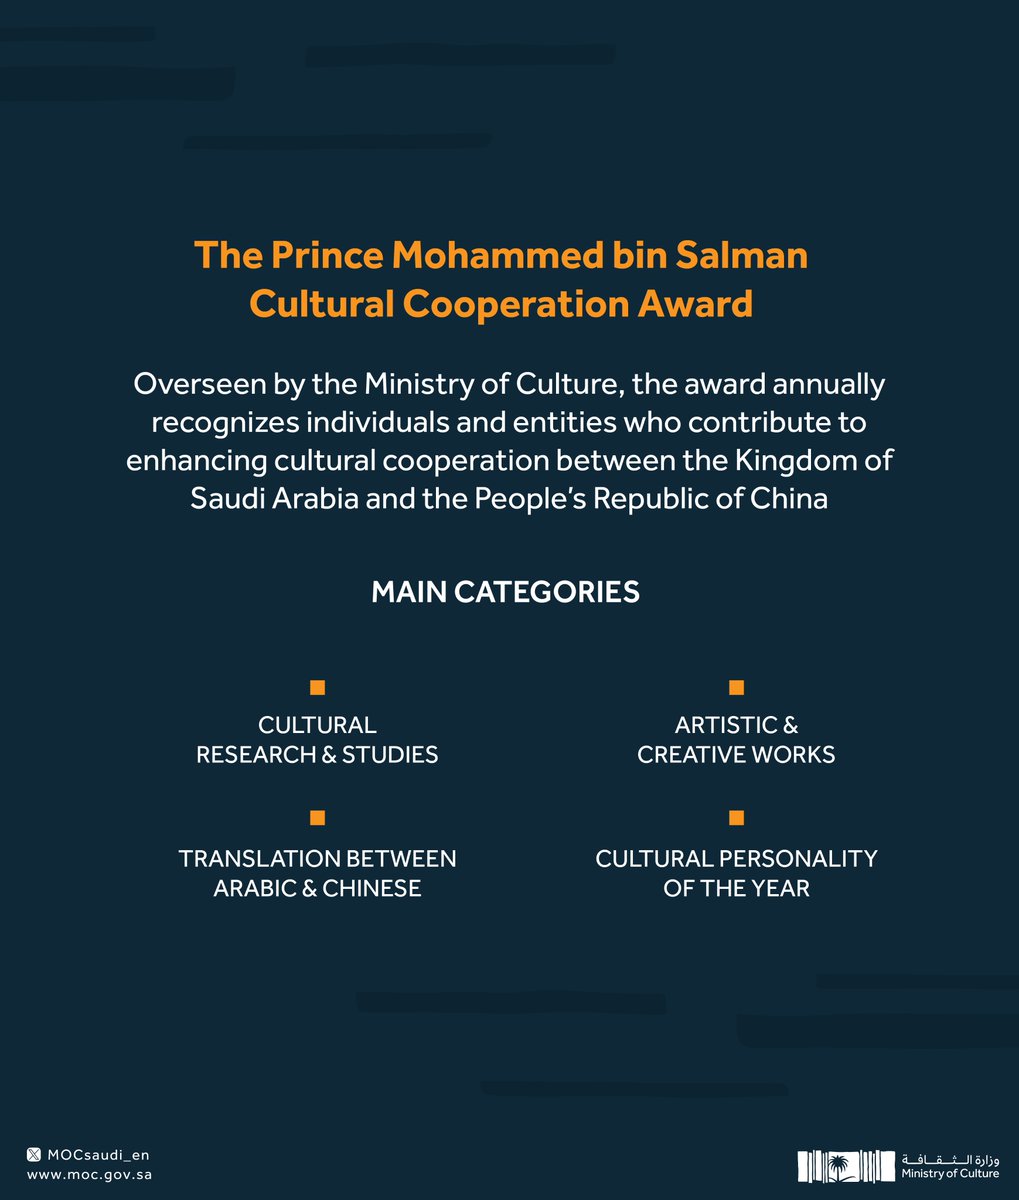 The Prince Mohammed bin Salman Cultural Cooperation Award supports cultural convergence, enhances cultural and creative production and encourages research in the cultural fields of the Kingdom and the People’s Republic of China. #SaudiMinistryOfCulture